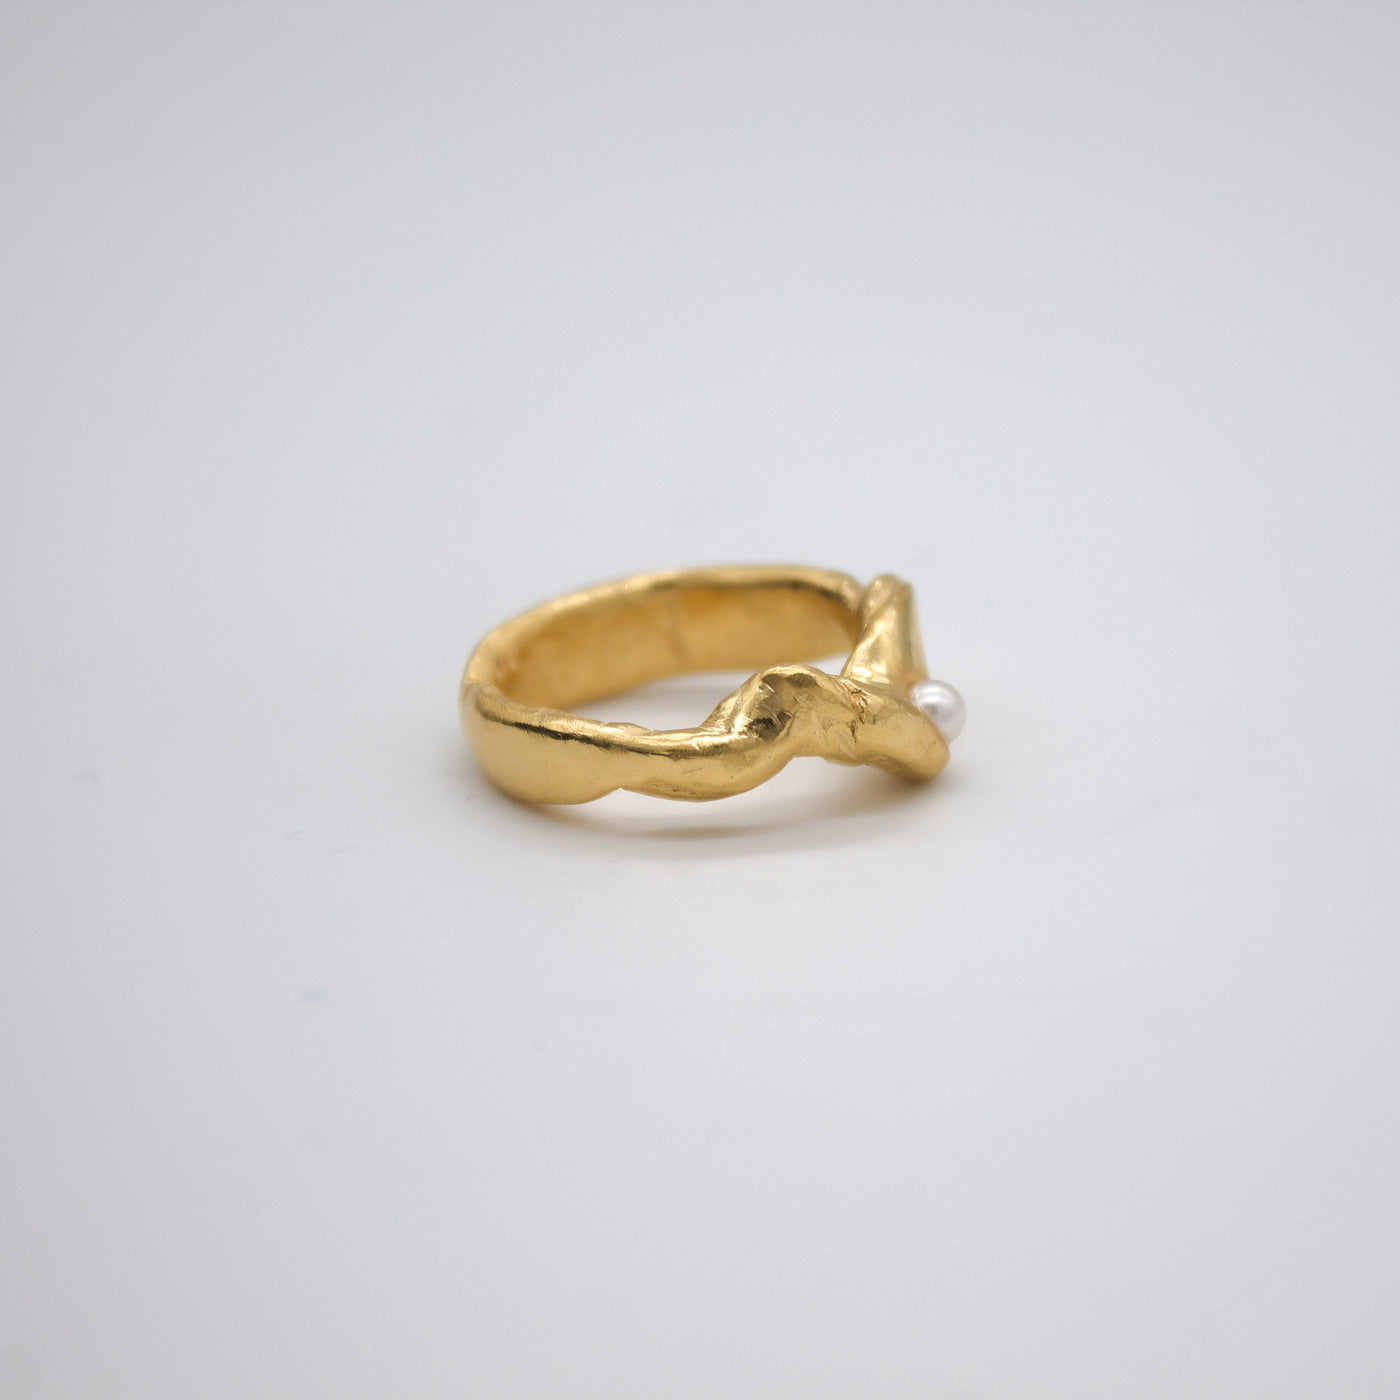 GJERDE // Gold-plated ring with a small freshwater pearl